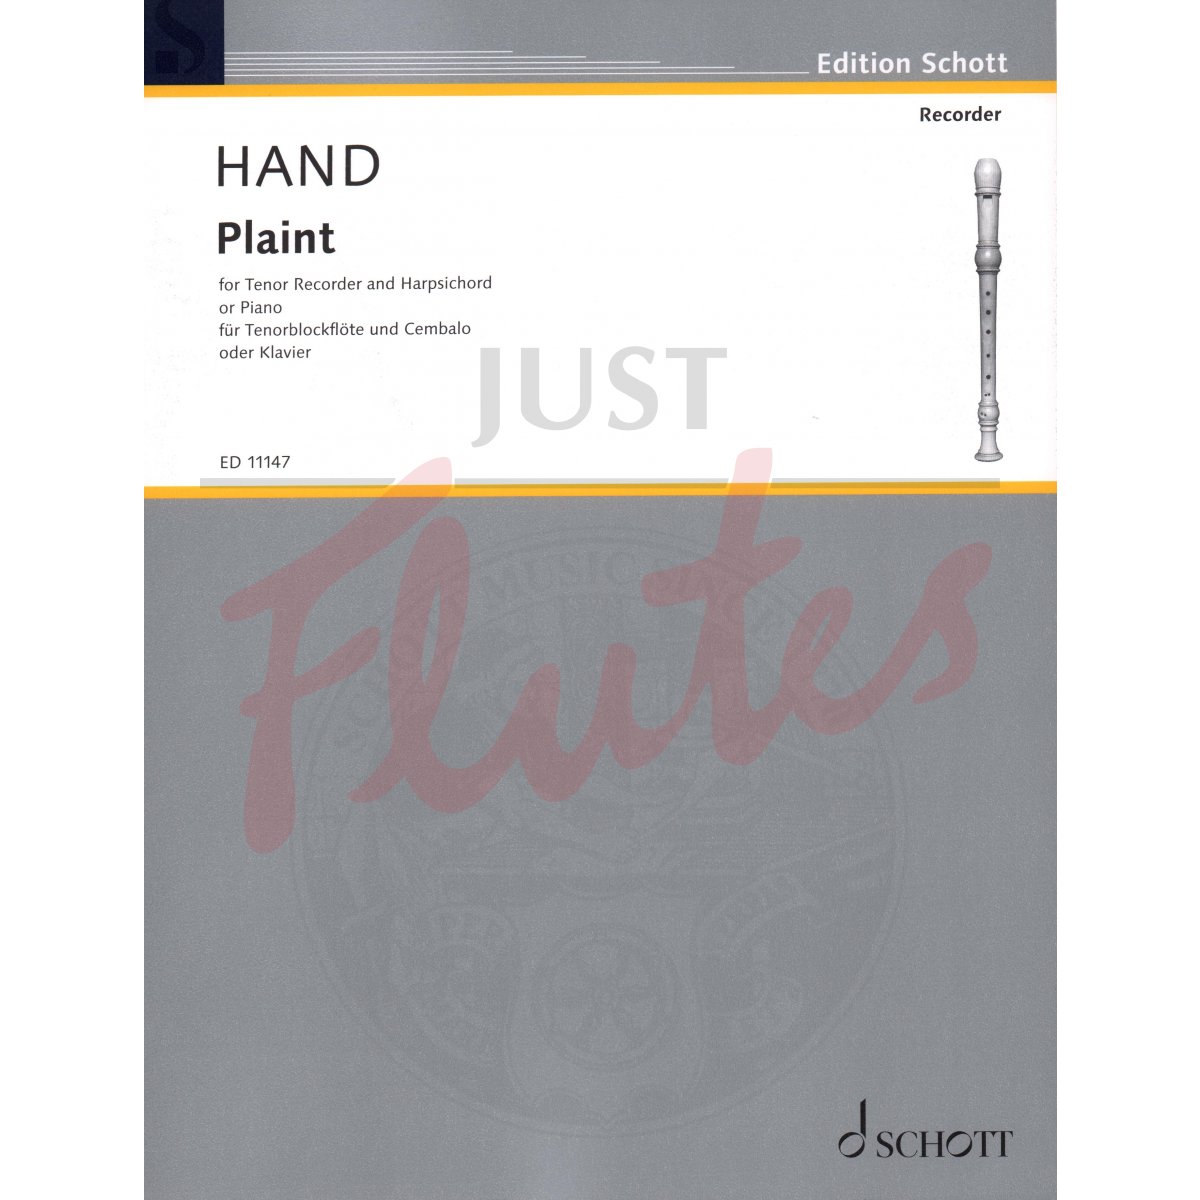 Plaint for Tenor Recorder and Harpsichord/Piano